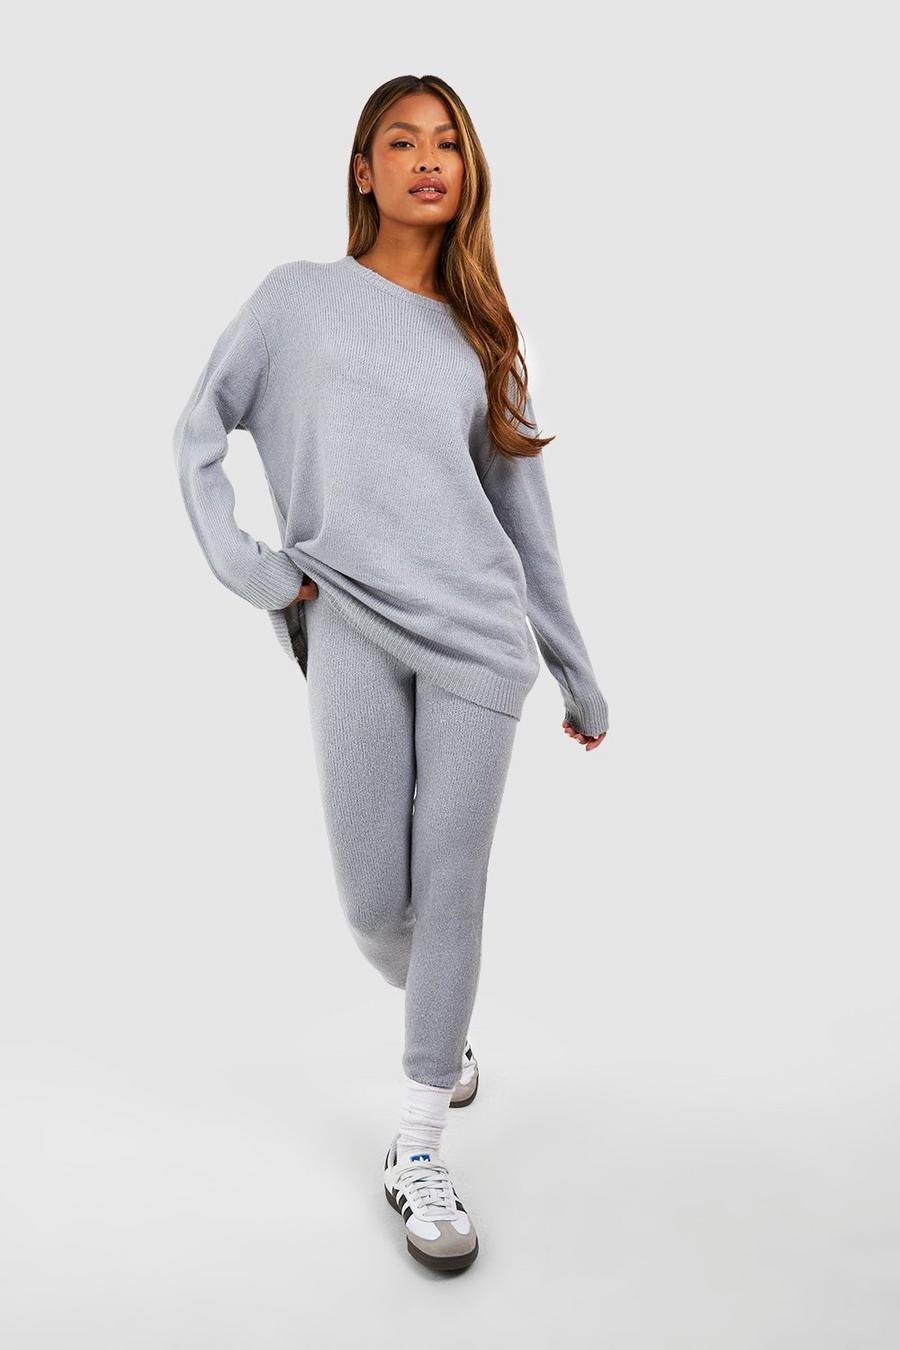 Grey Soft Knit Crew Neck Jumper & Trouser Co-ord